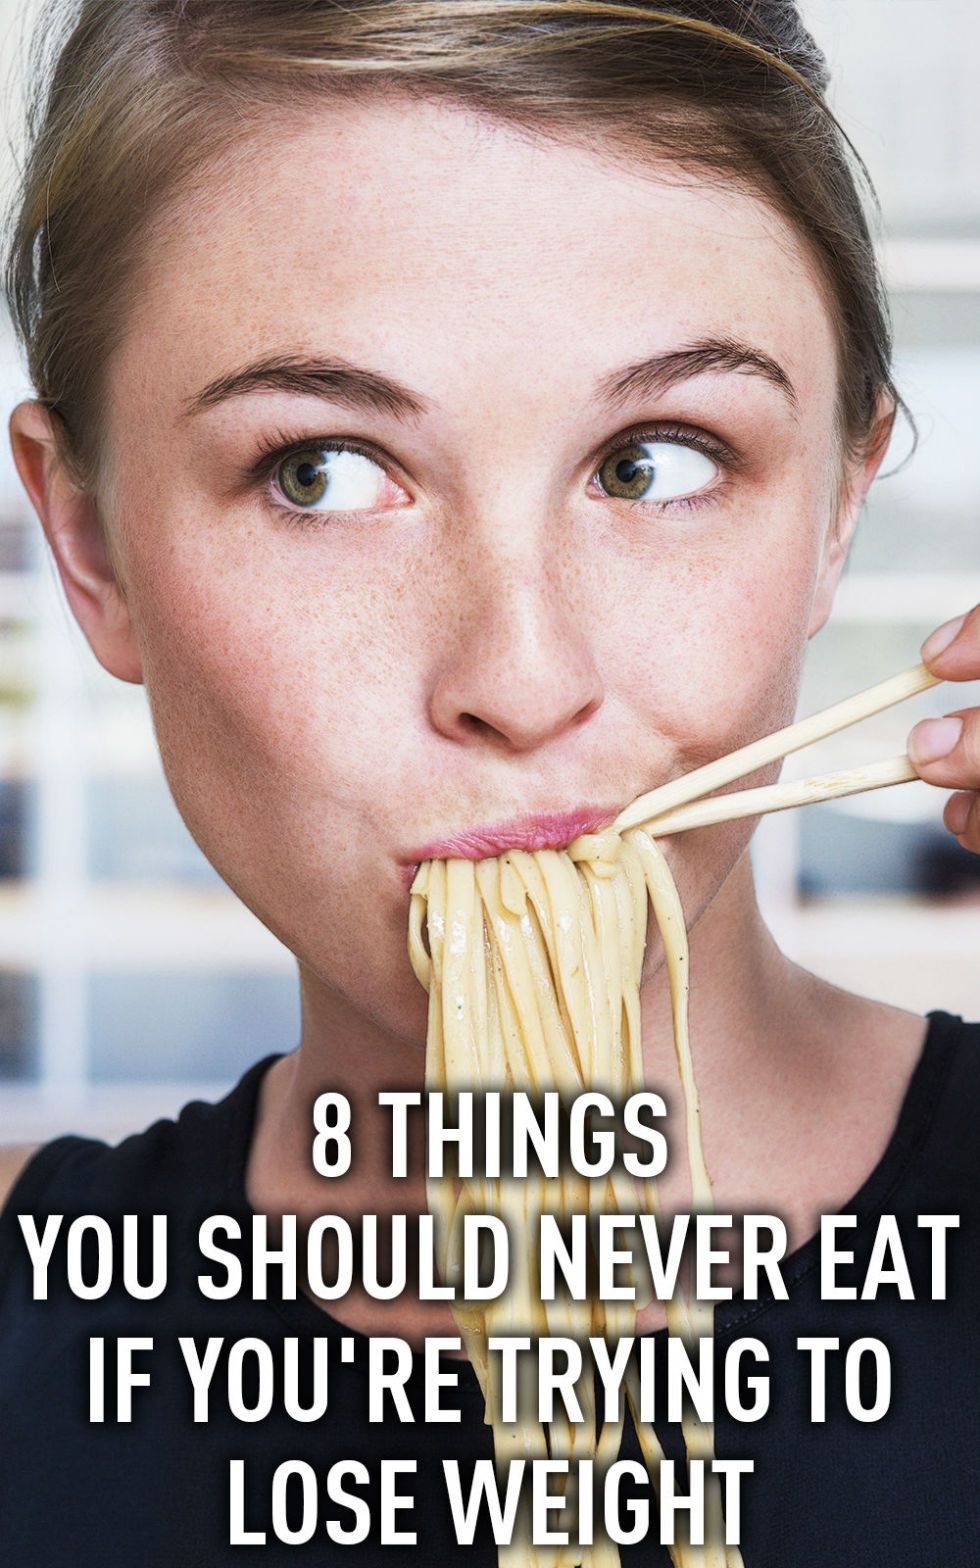 8 Surprising Things You Should Never Eat if You're Trying to Lose Weight